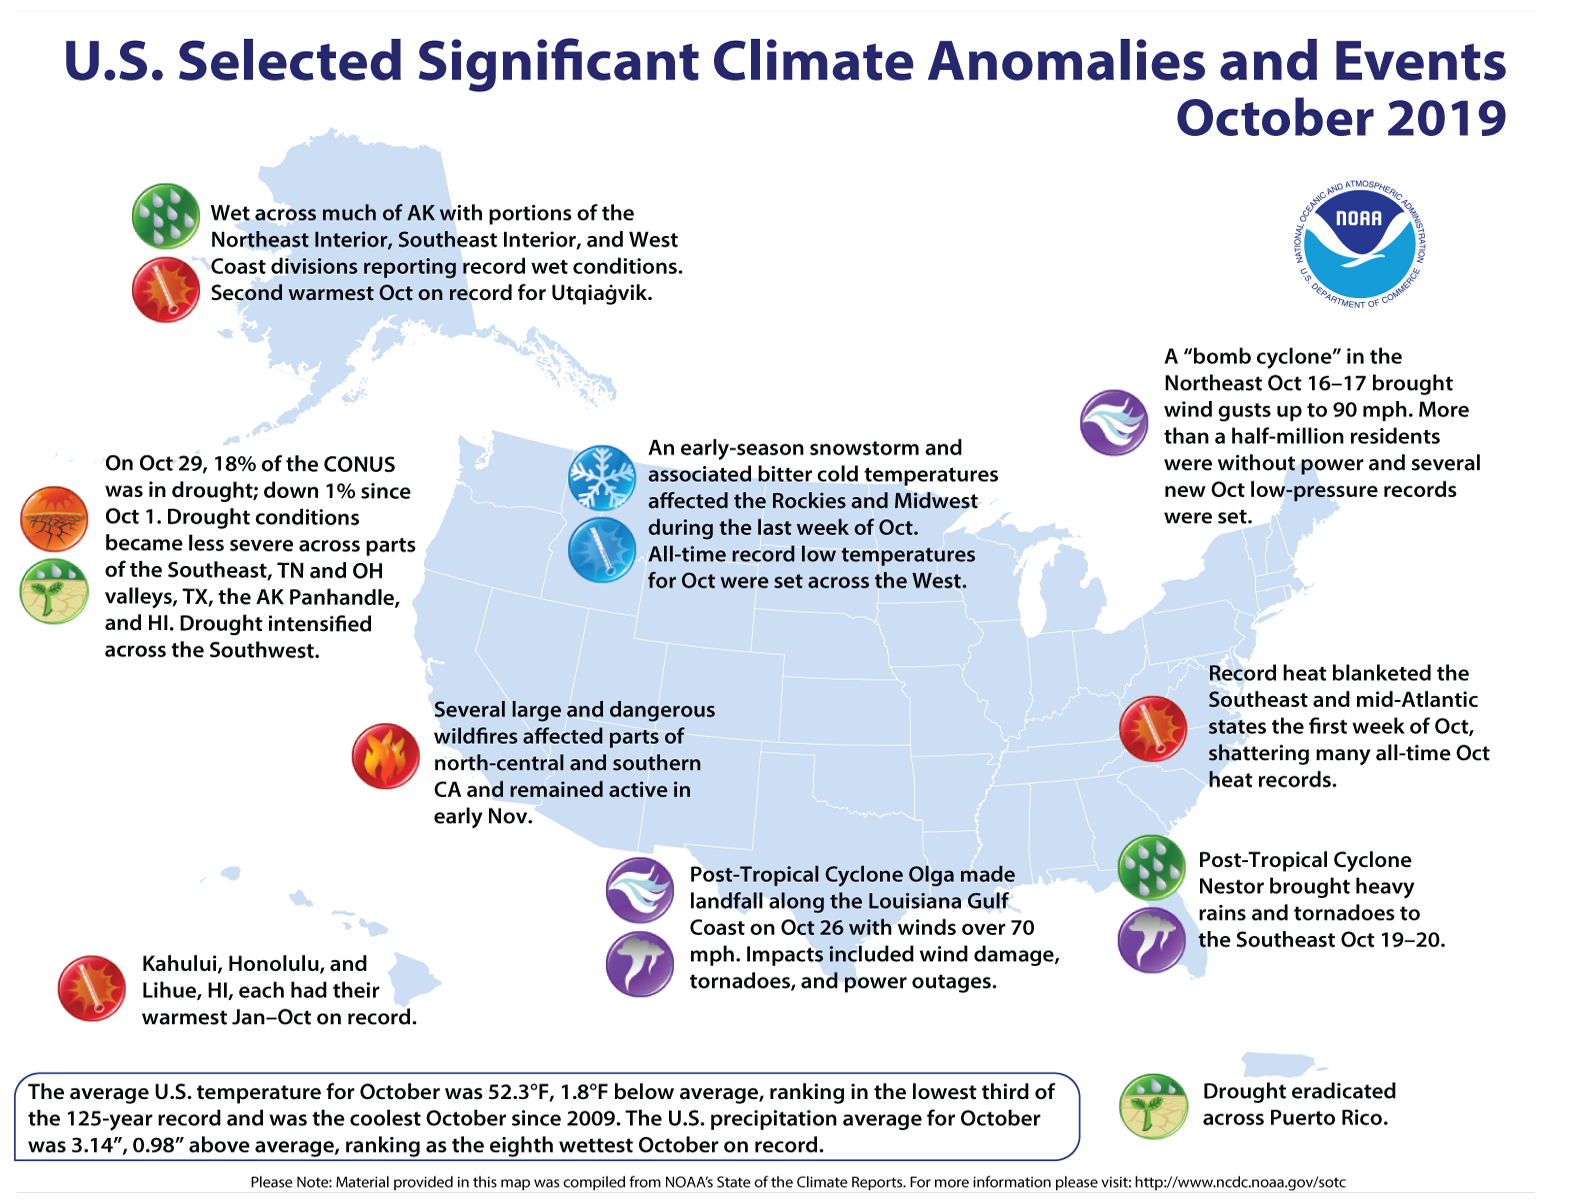 An annotated map of the United States showing notable climate and weather events that occurred across the country during October 2019. To learn more, please visit http://bit.ly/USClimate201910.